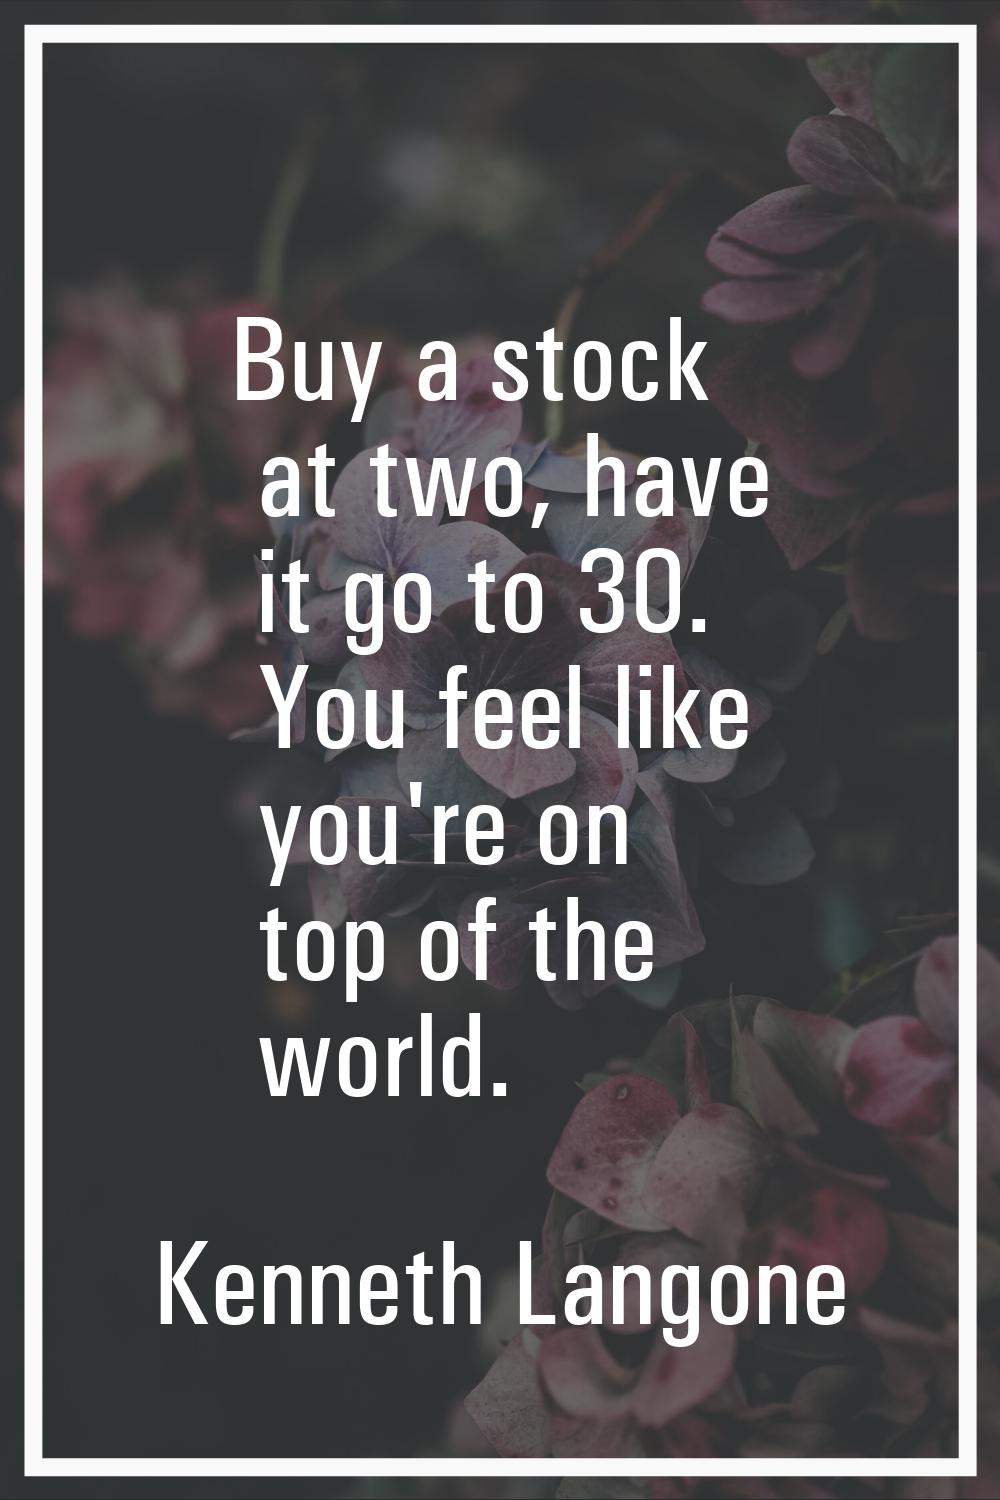 Buy a stock at two, have it go to 30. You feel like you're on top of the world.